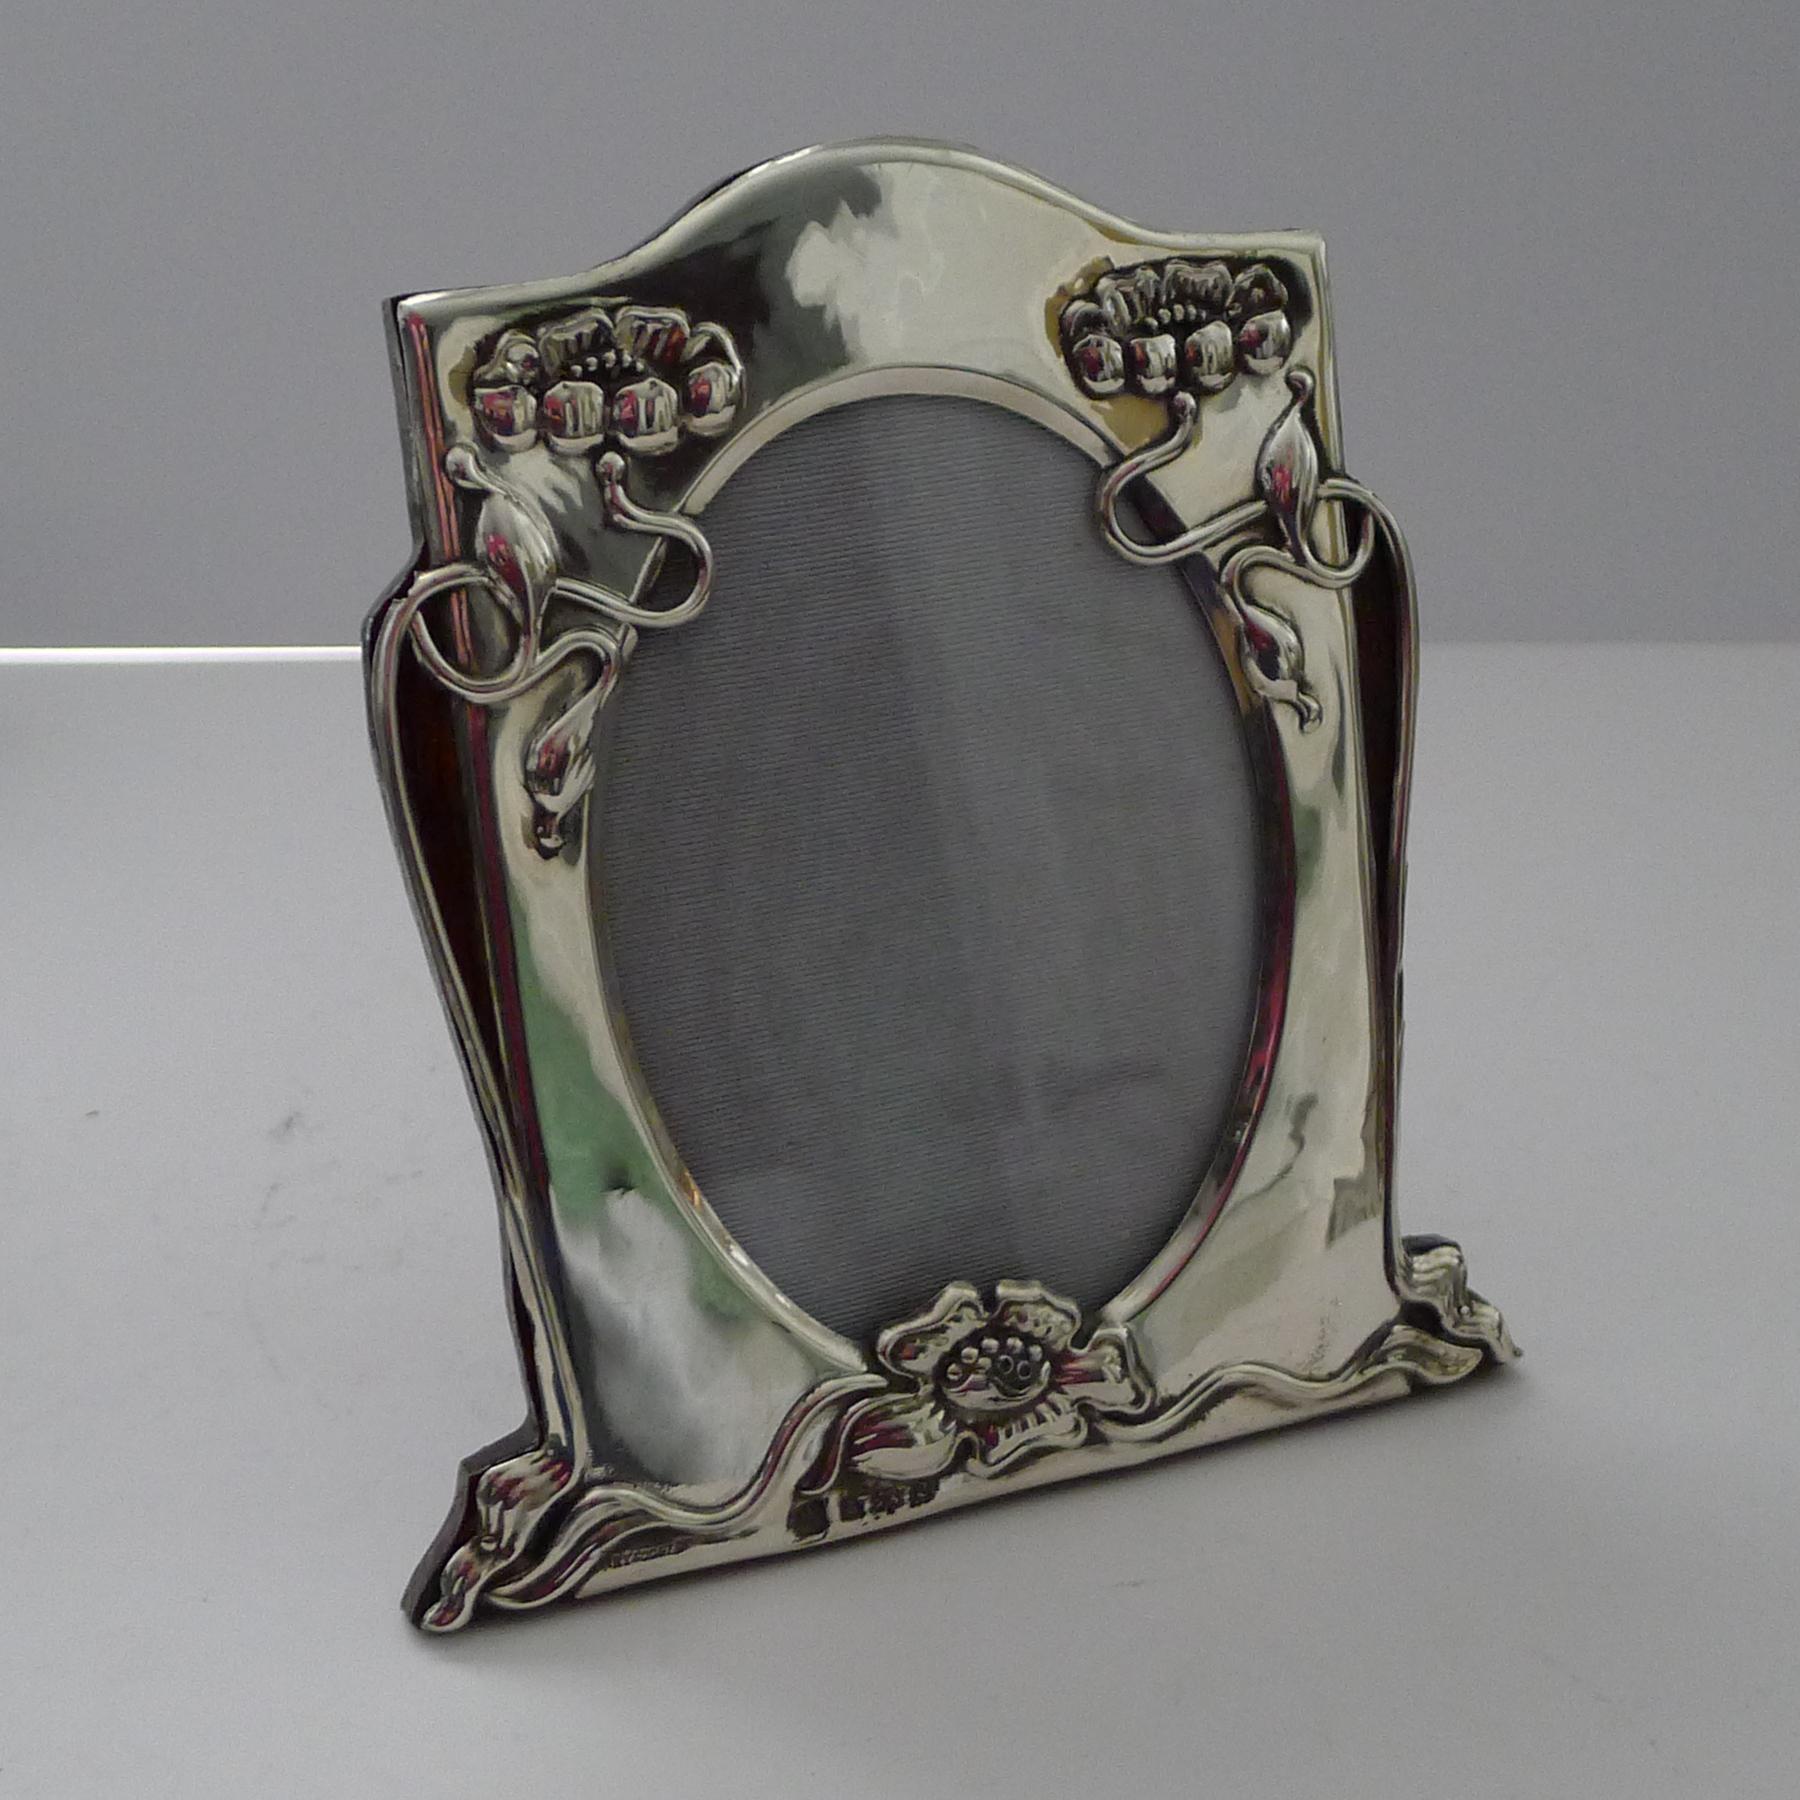 A truly stylish antique English sterling silver photograph frame backed in solid English Oak, incorporating a folding easel stand.

Beautifully decorated with stylised flowers, the silver is fully hallmarked for Birmingham 1902 together with the